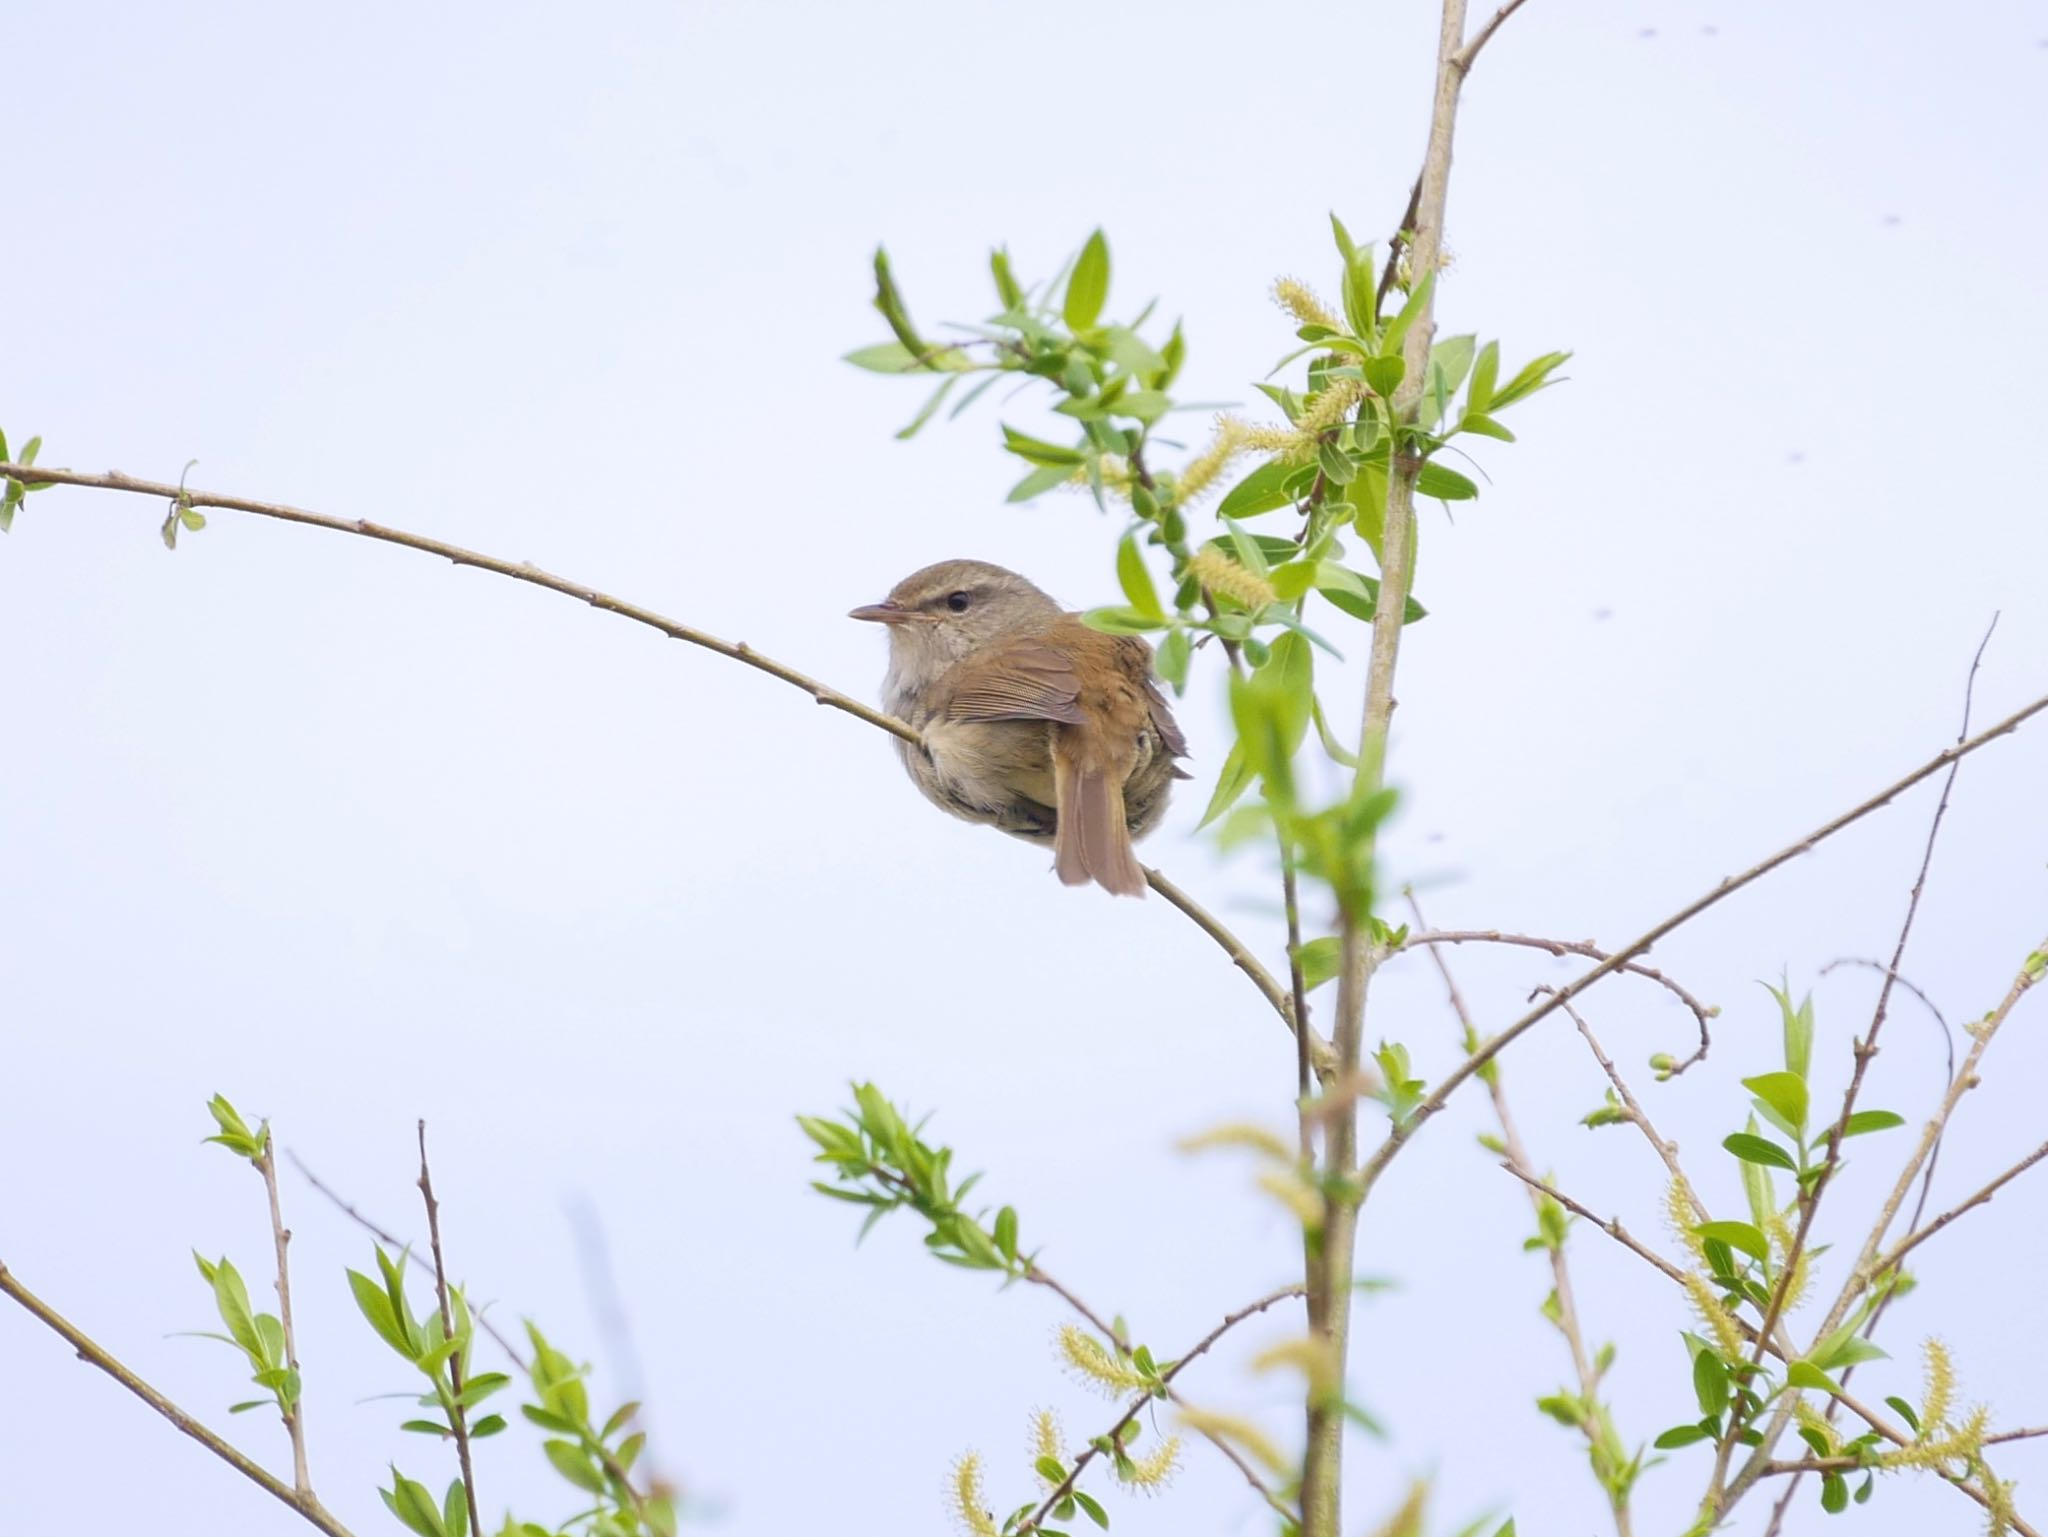 Photo of Japanese Bush Warbler at 多摩川 by のーべる